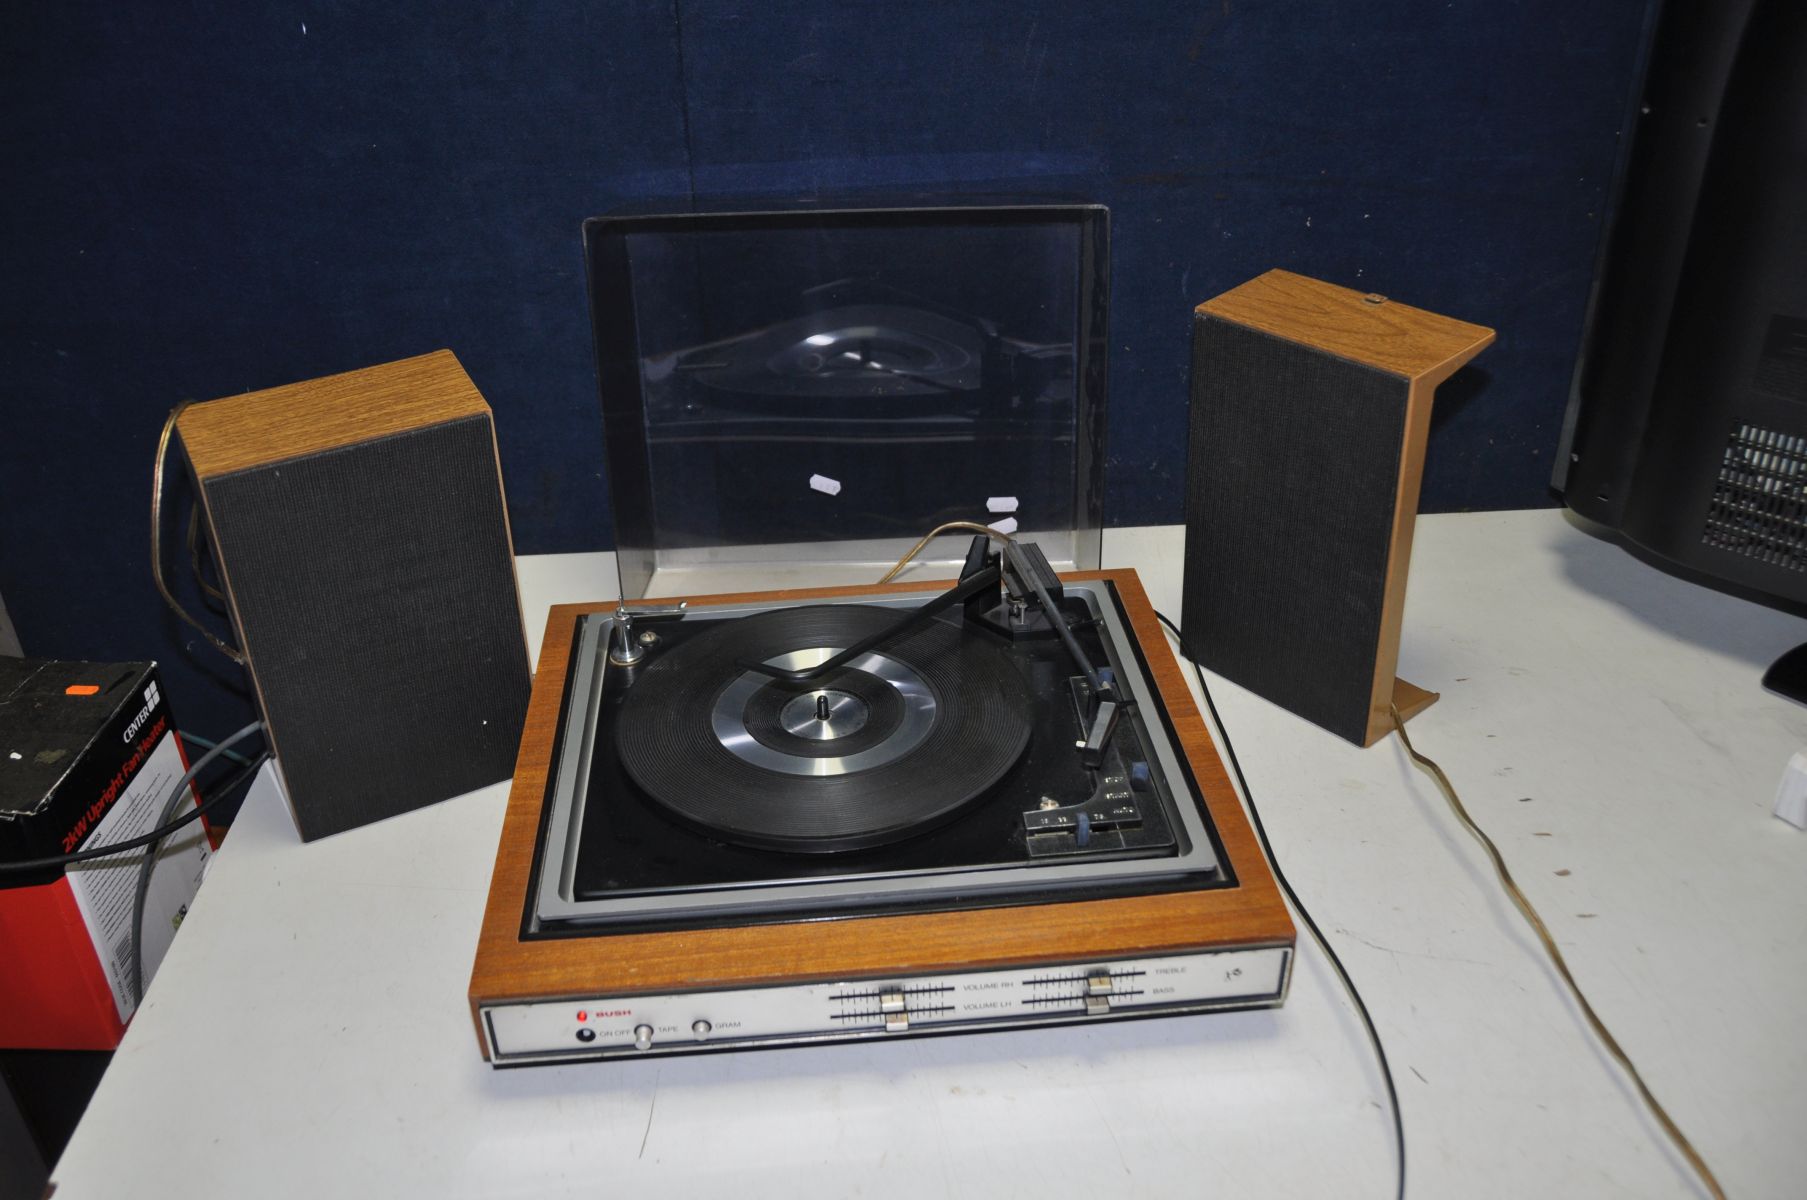 A VINTAGE BUSH A1005 RECORD PLAYER and a pair of speakers (PAT fail due to uninsulated plug but